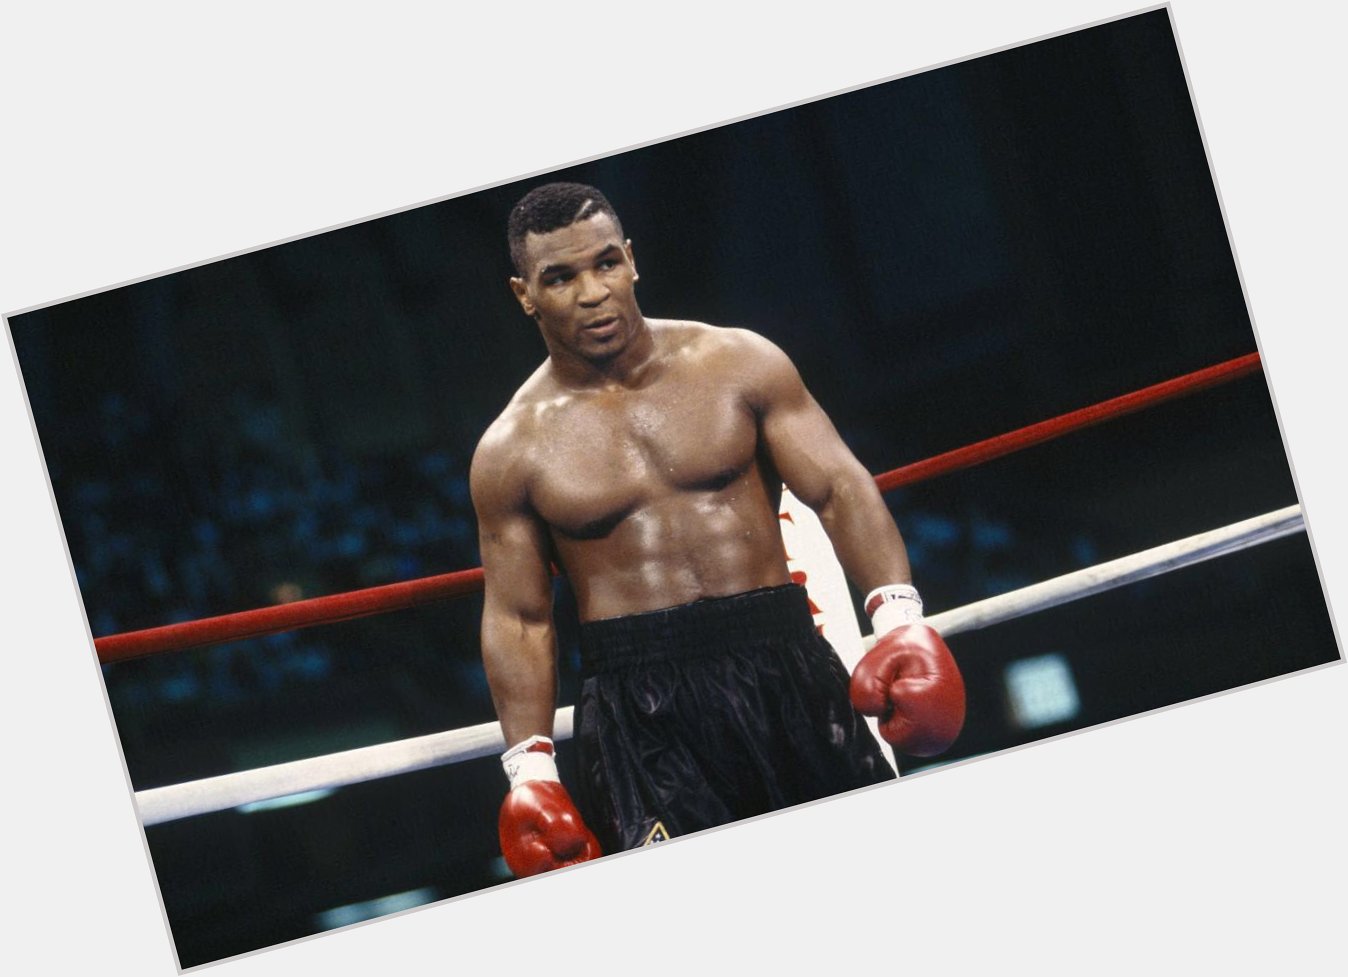 One of the greatest of all time.

Happy birthday to the \baddest man on the planet\, Mike Tyson!  